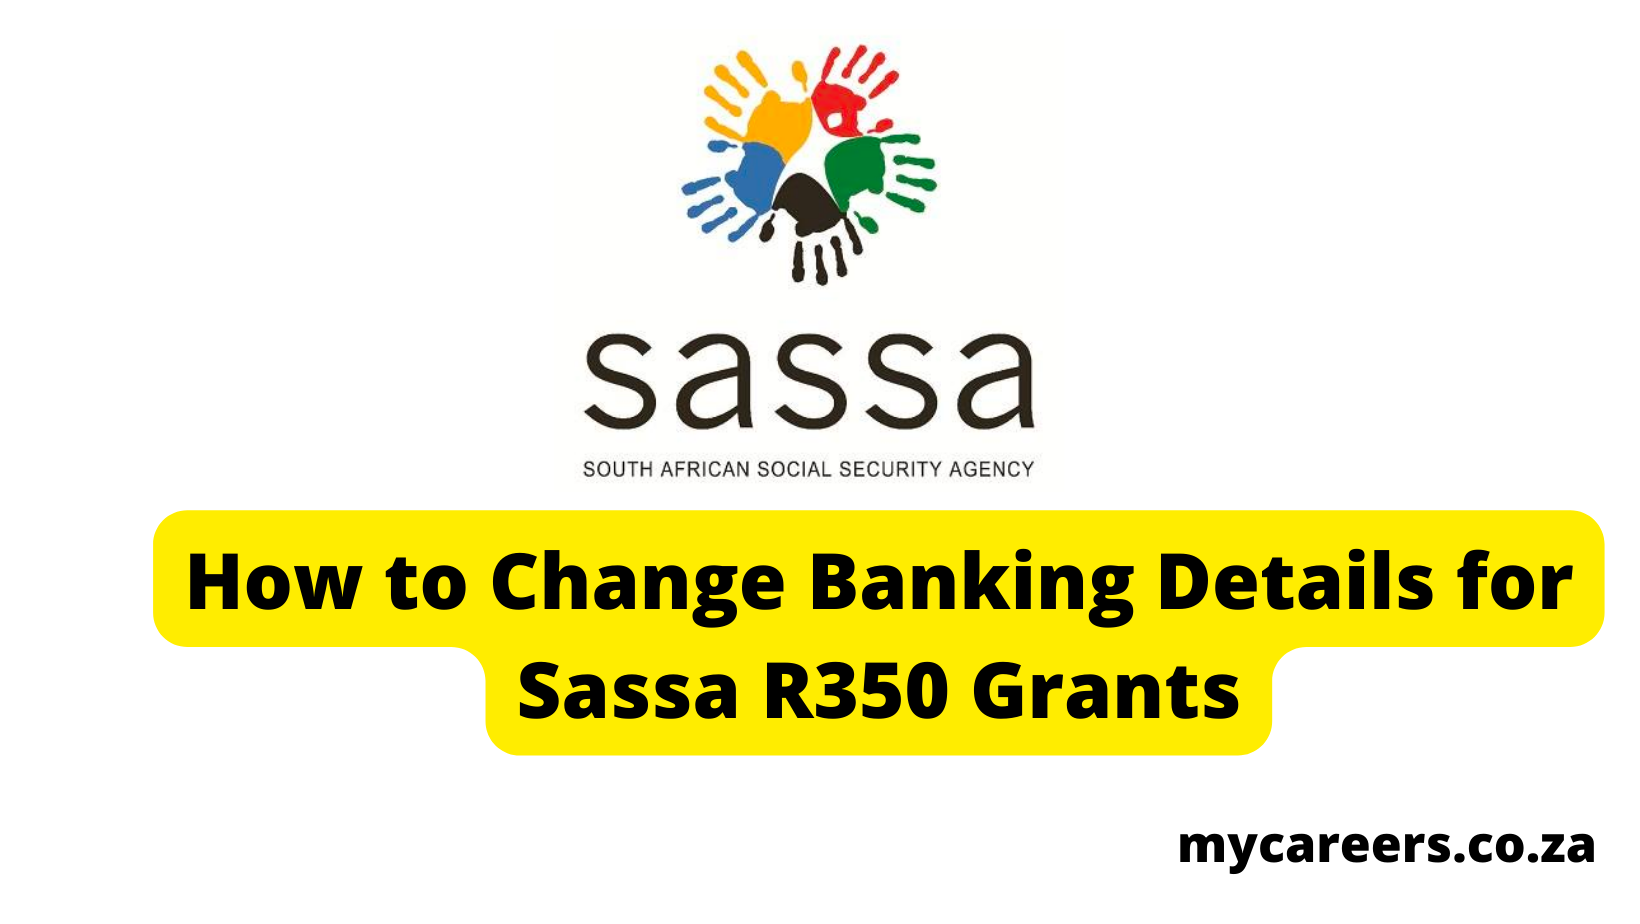 How to Change Banking Details for Sassa R350 Grants